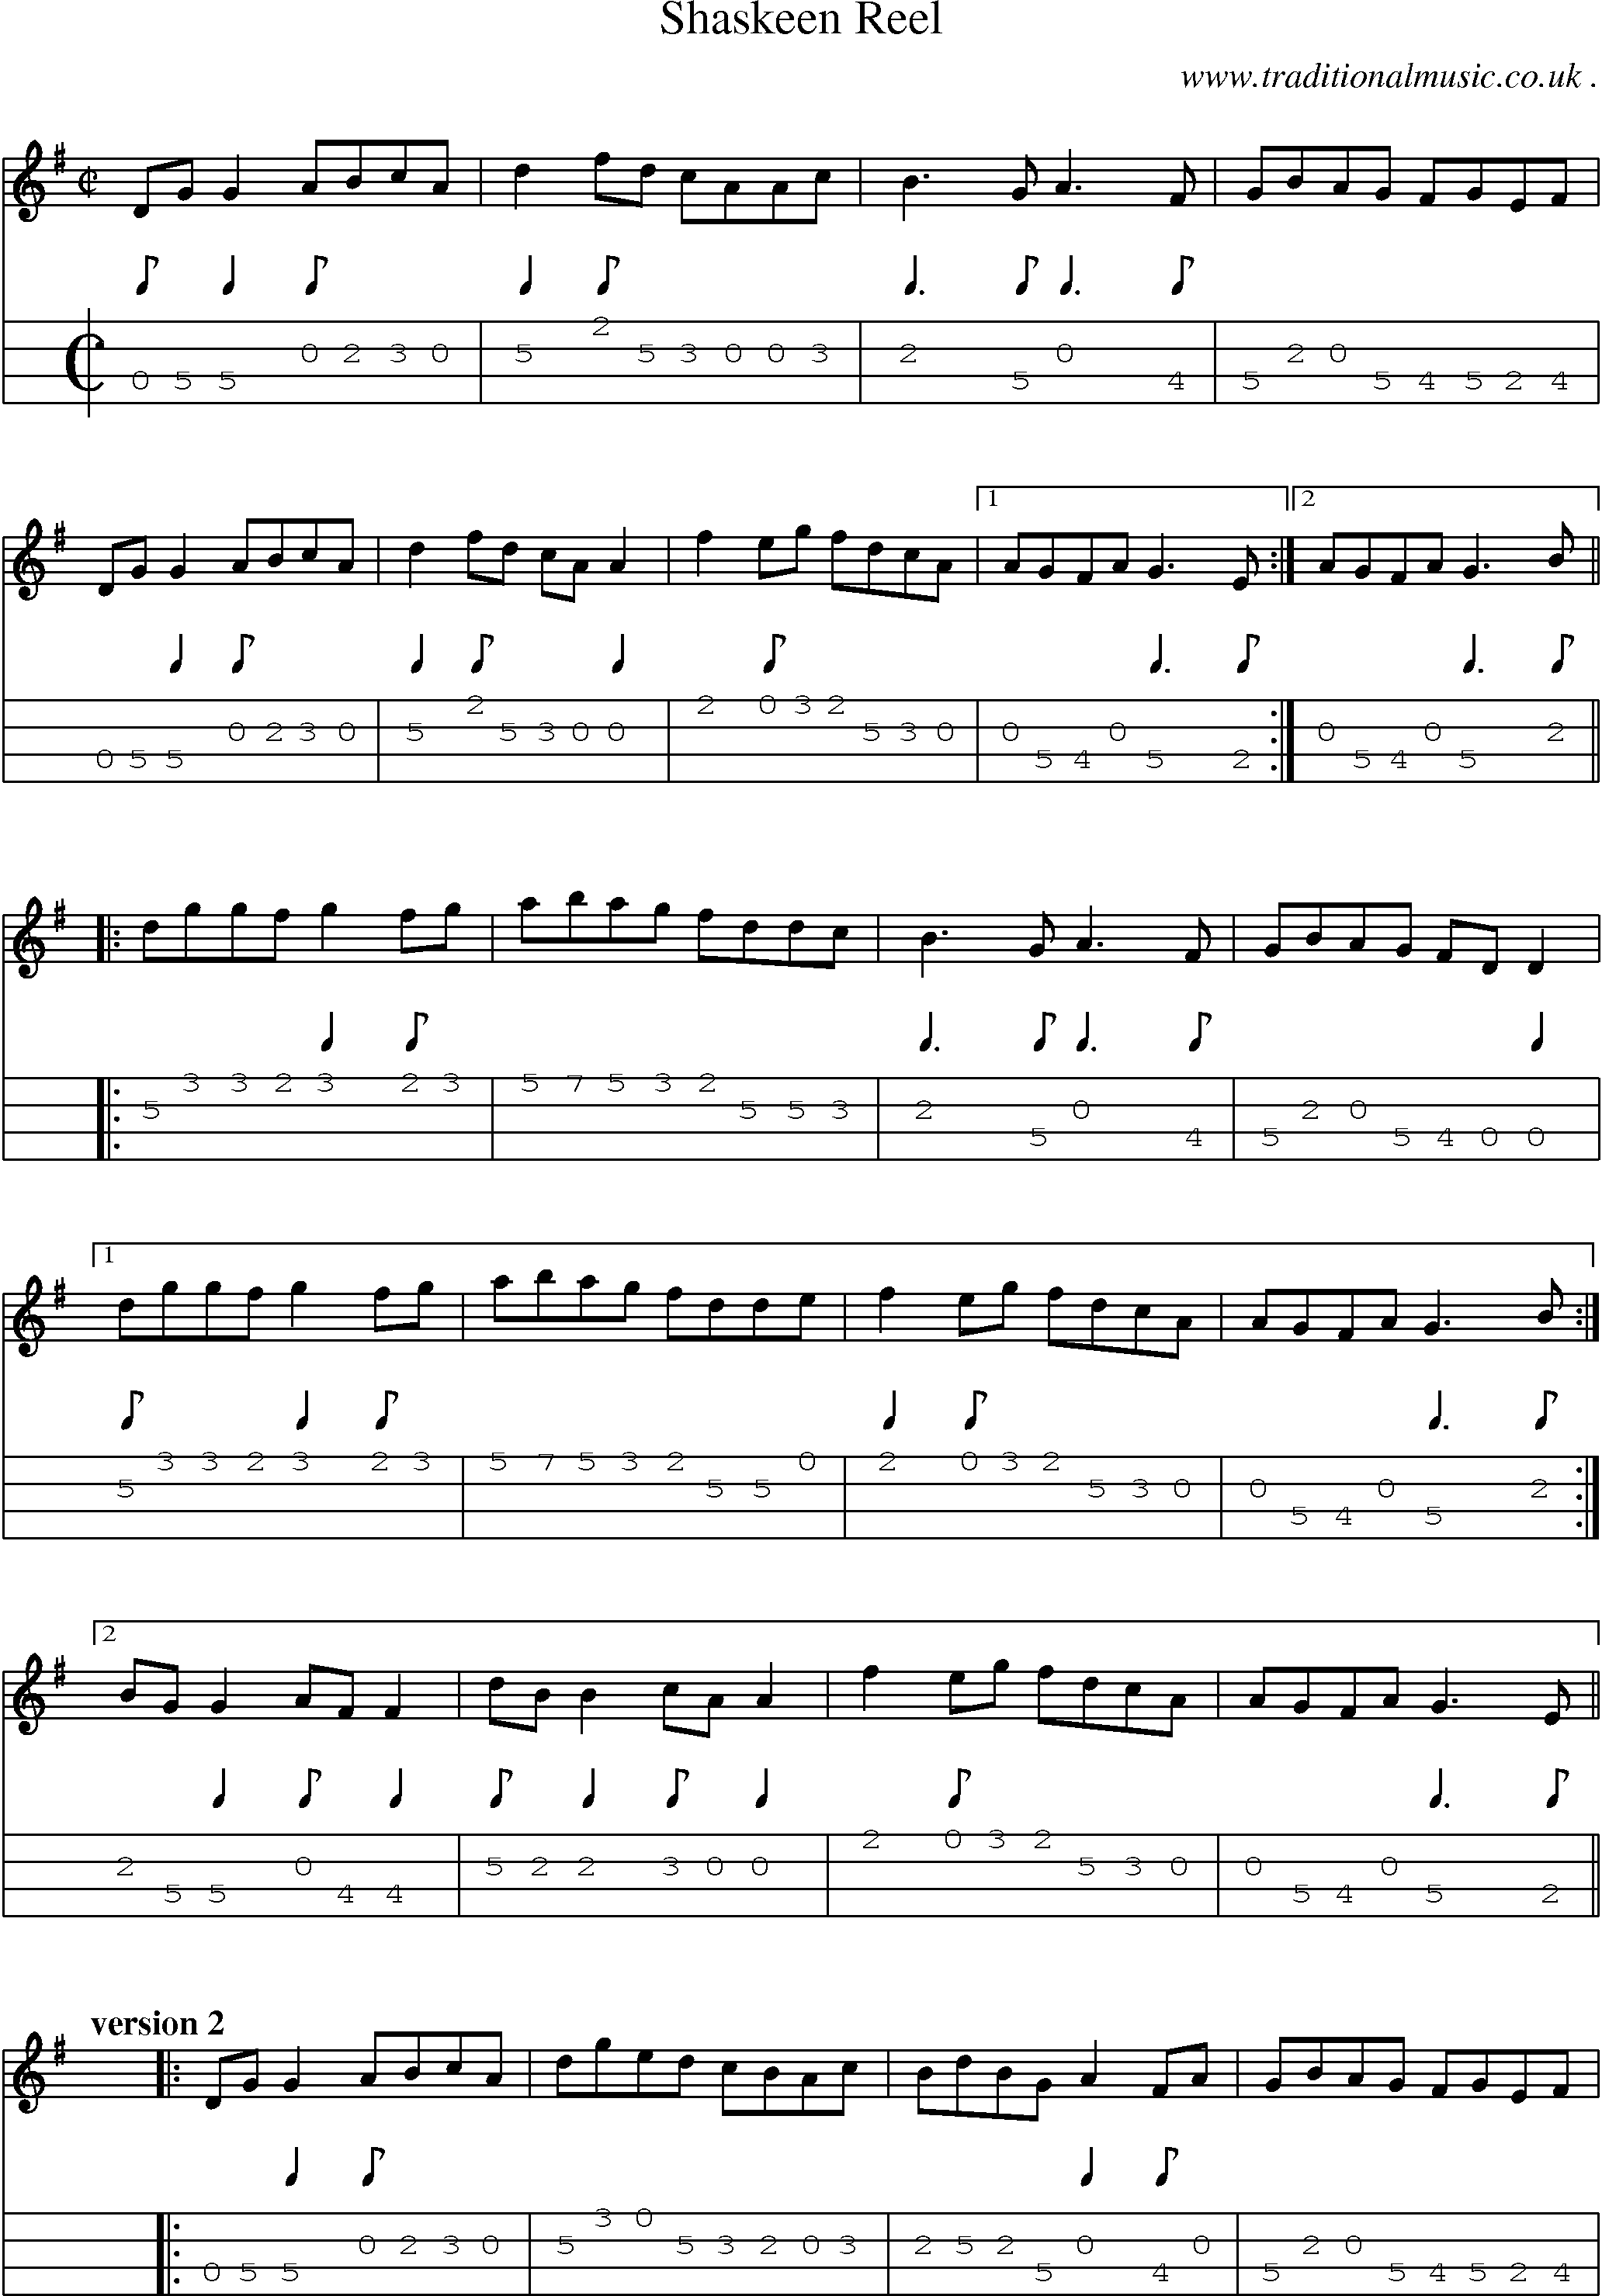 Sheet-Music and Mandolin Tabs for Shaskeen Reel